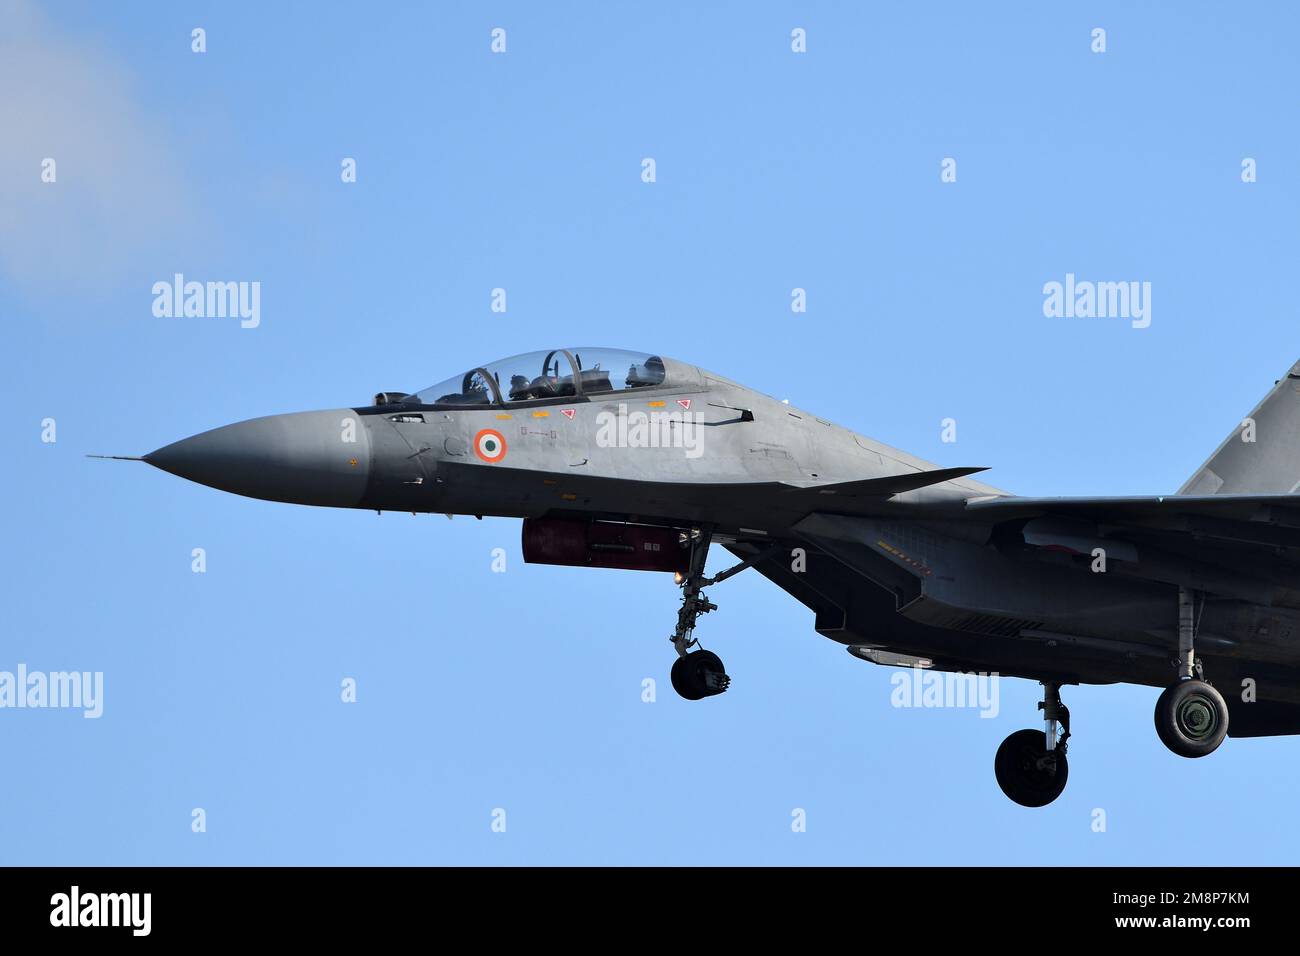 An Indian Air Force fighter jet on approach. Stock Photo